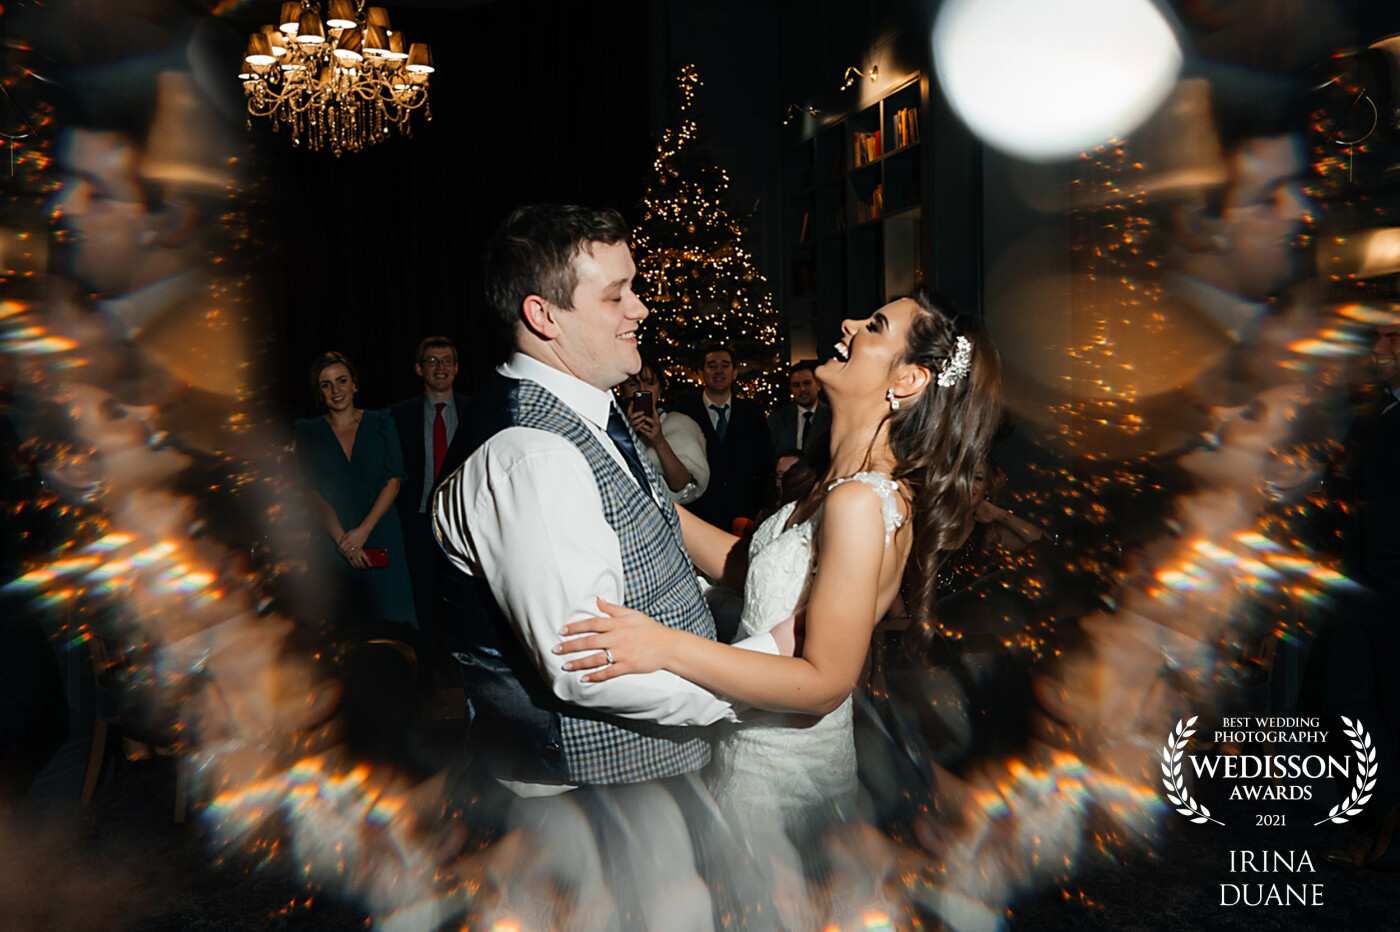 Year's Eve Weddings are the best. It's a great way to launch the year and the marriage!<br />
OCF and prism are my favourite combo to capture this magical time of the year. 